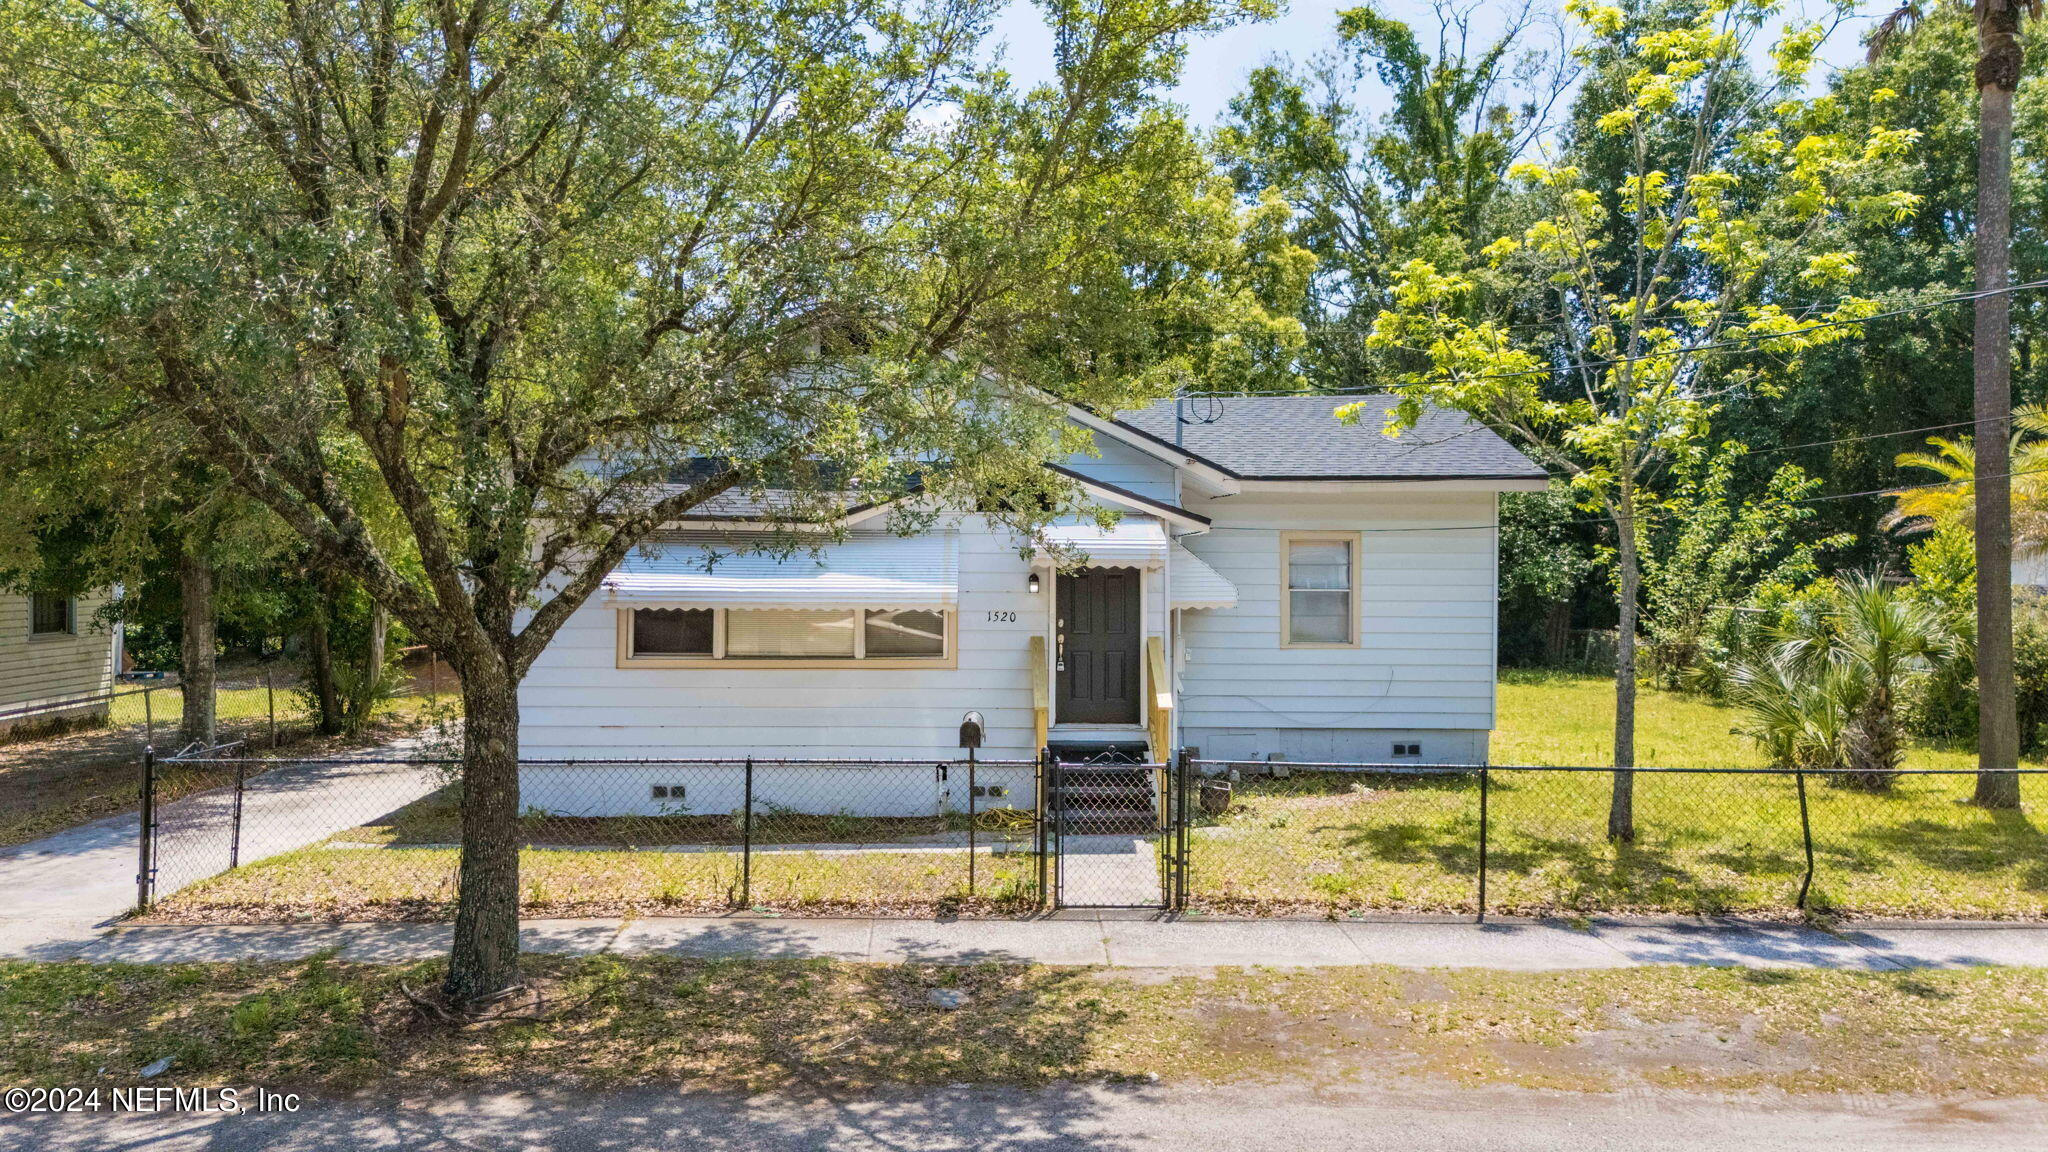 Jacksonville, FL home for sale located at 1520 E 25th Street, Jacksonville, FL 32206